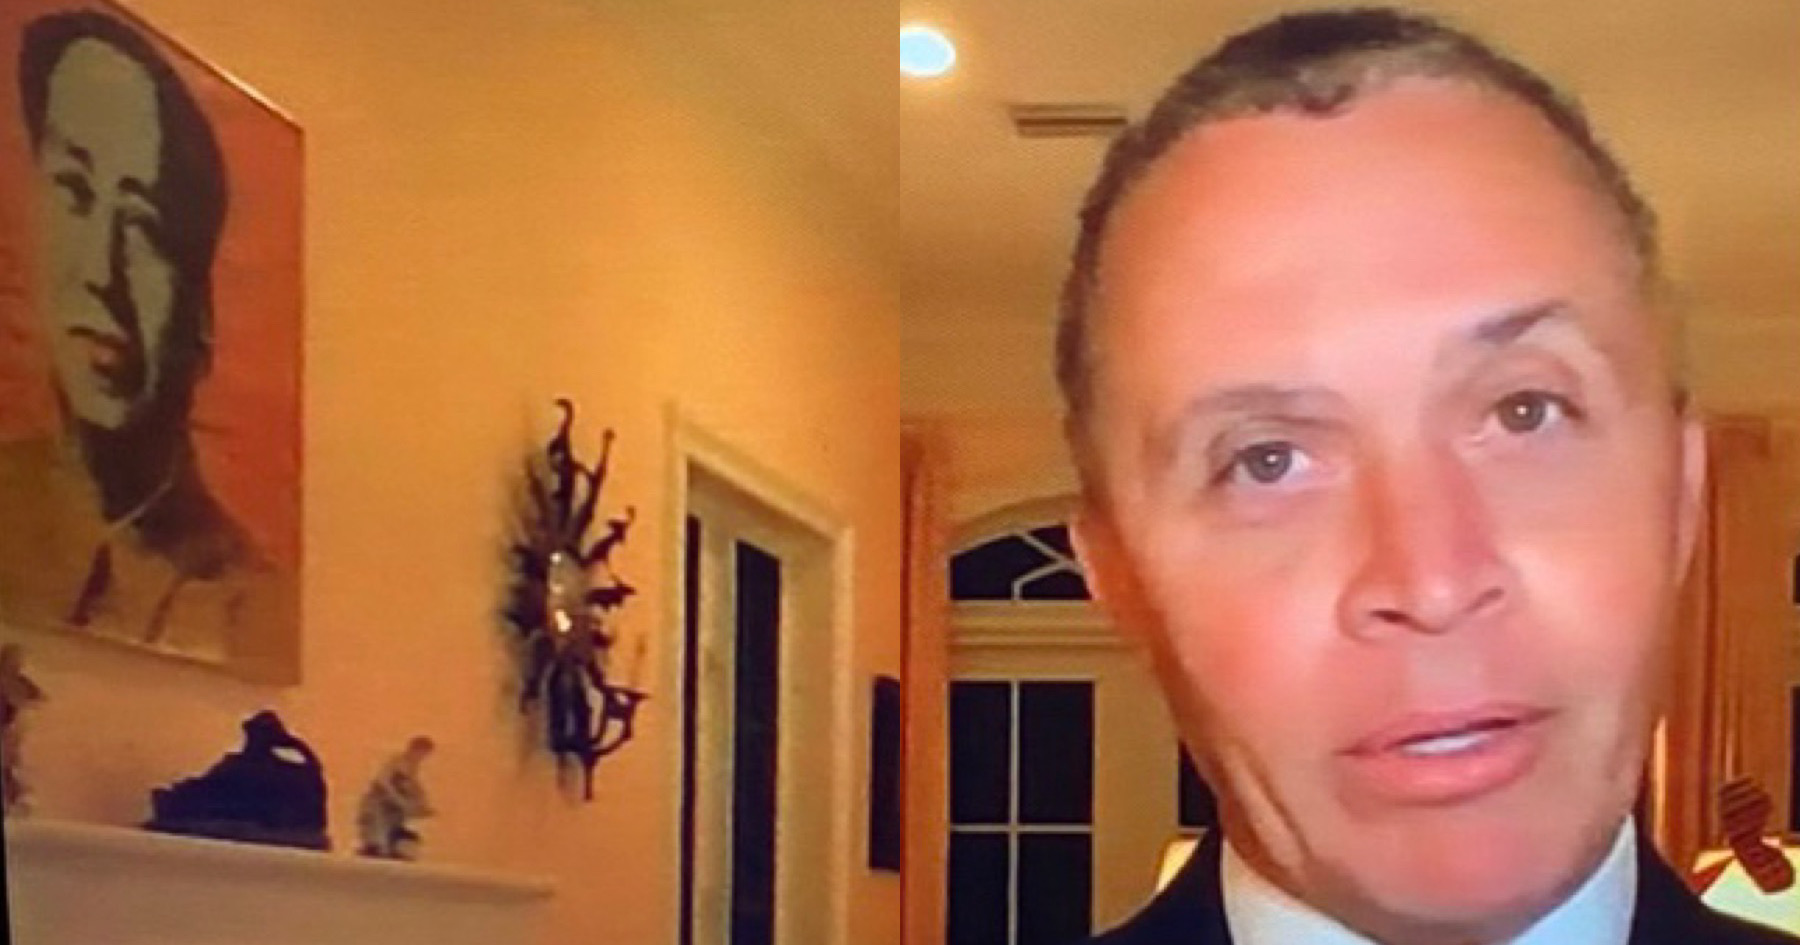 Fox News Guest Caught With Mao Painting in Background Claims He Is 'Just Renting' and 'Didn't Choose the Art' - Media Right News